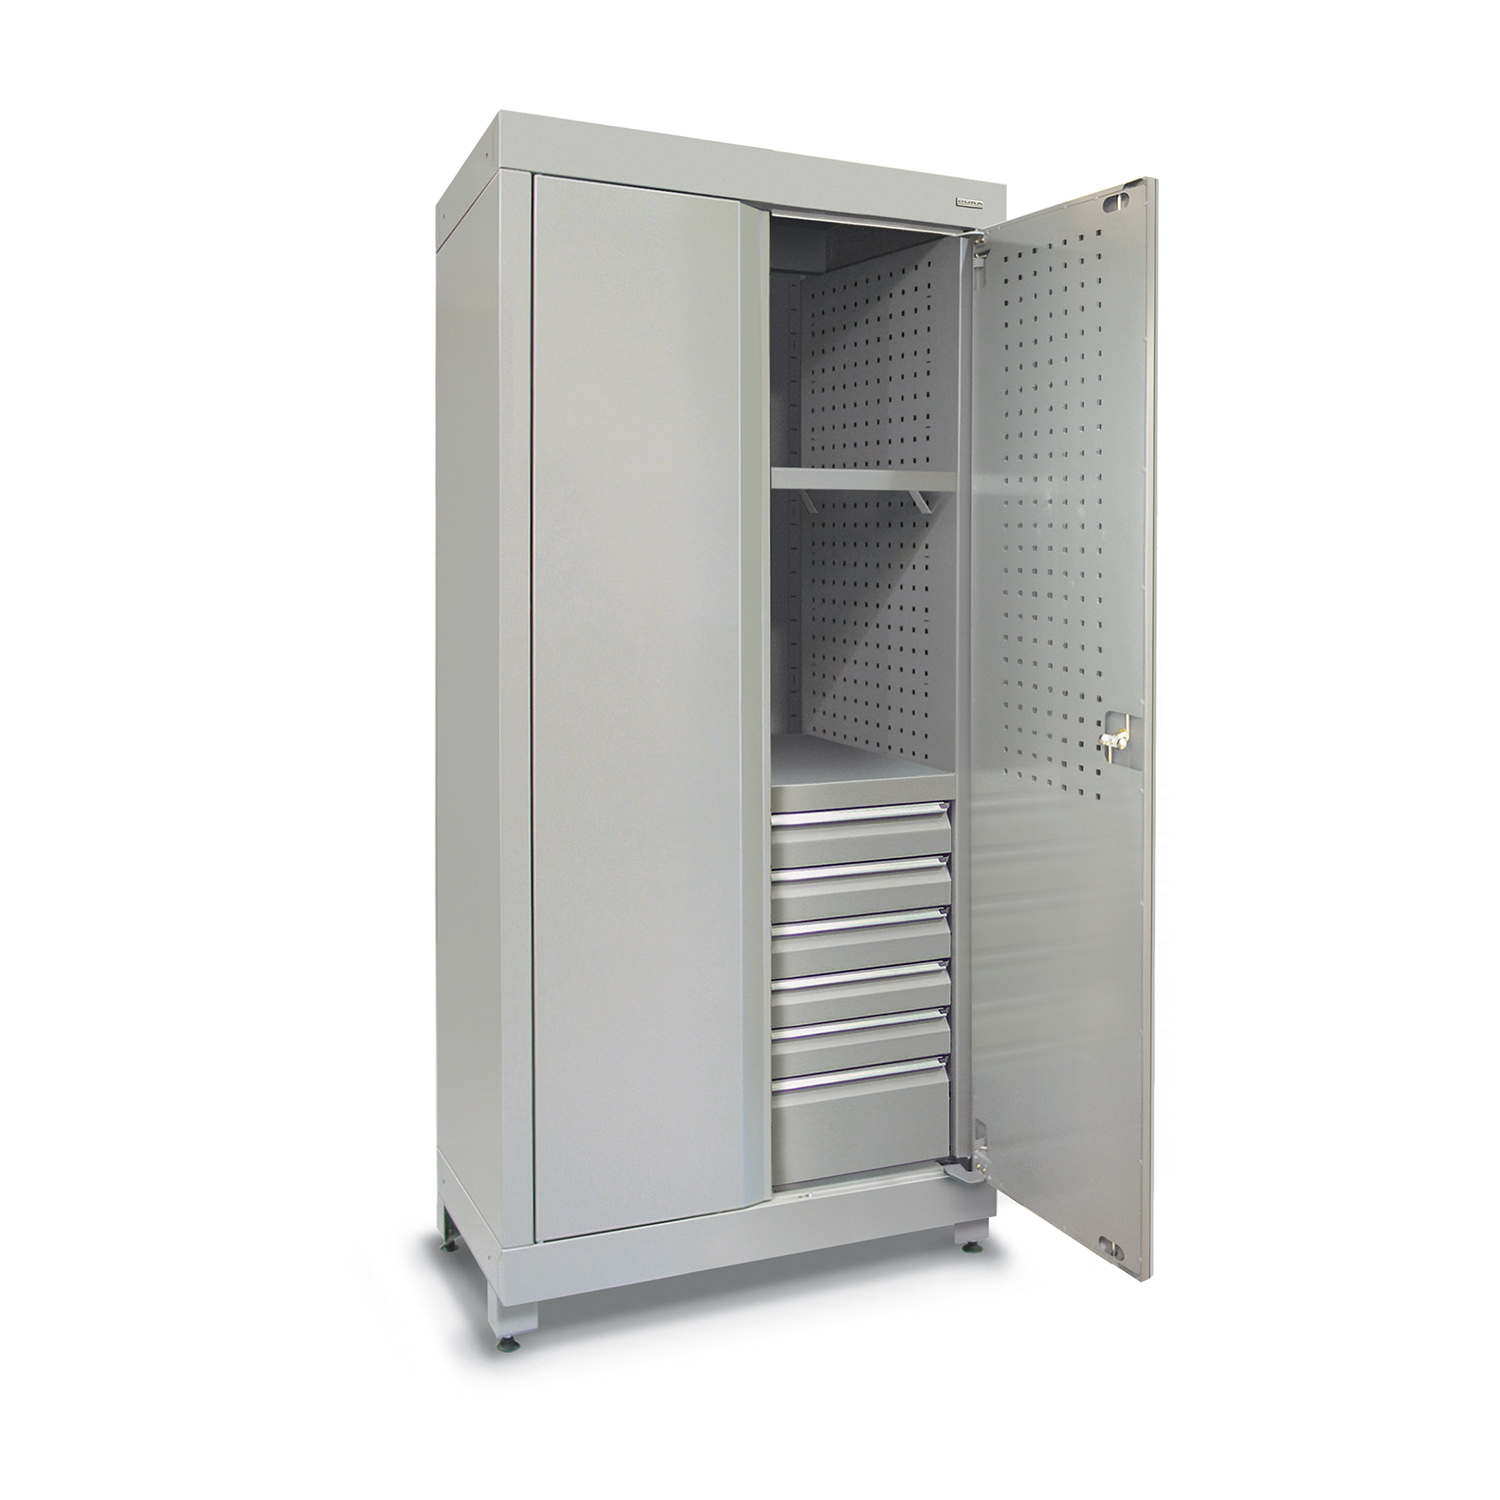 900mm Heavy-duty shelving unit with 6 drawers